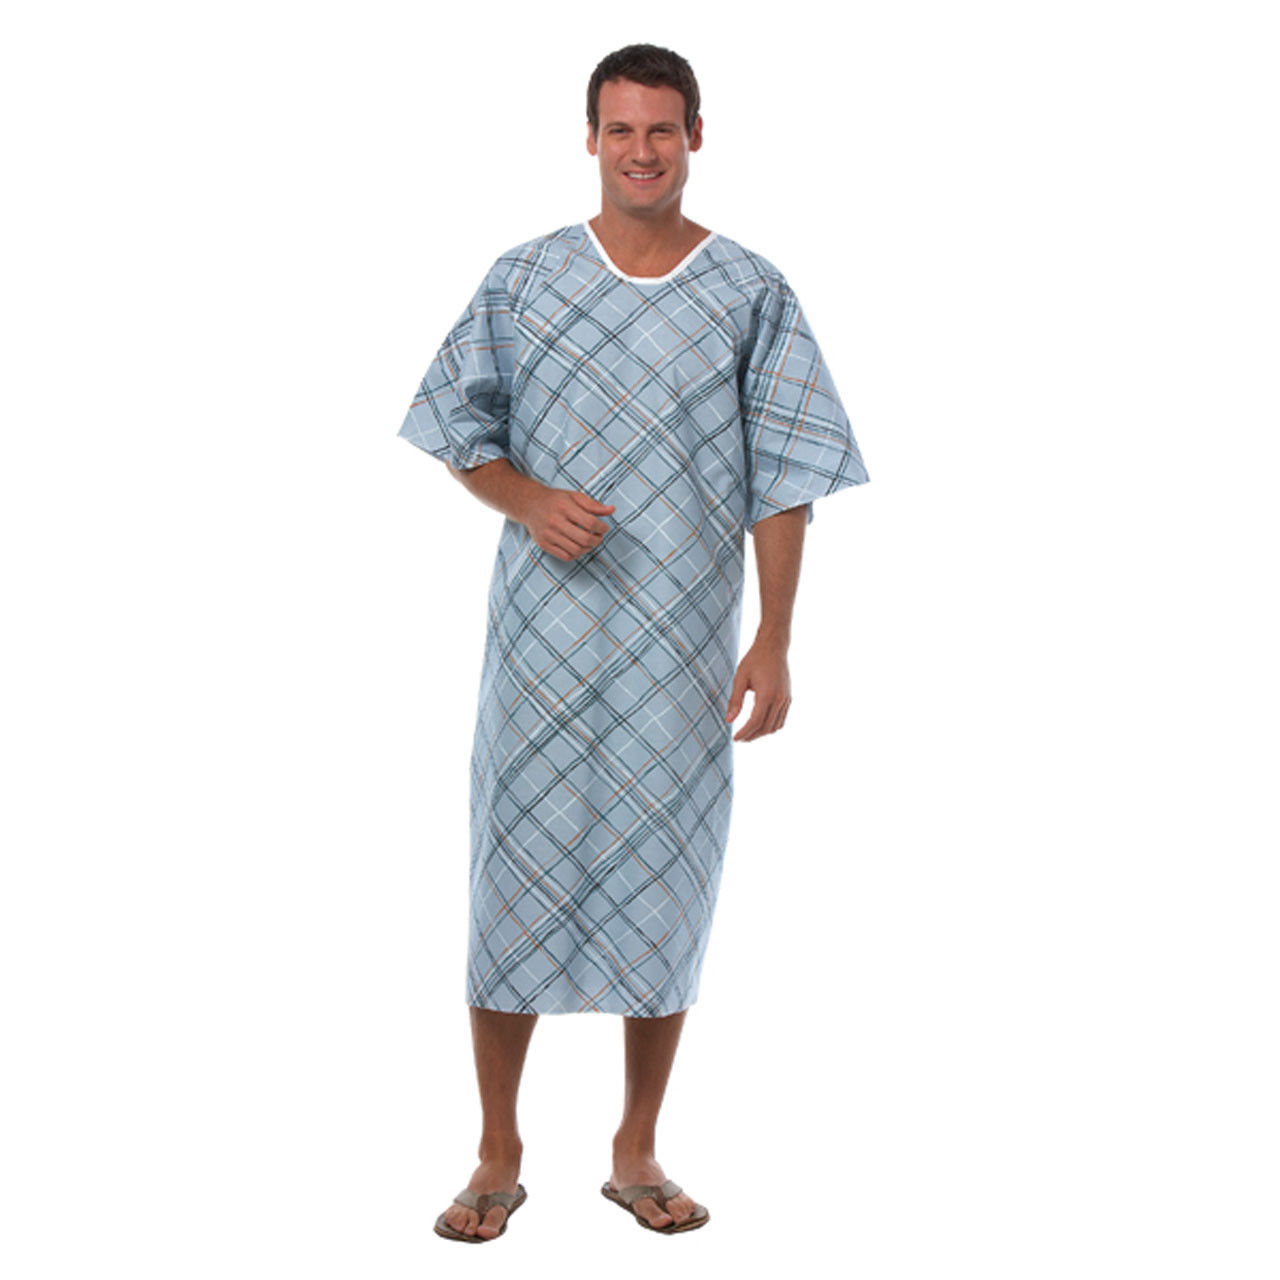 What are the measurements of the hospital gown's sweep and length?